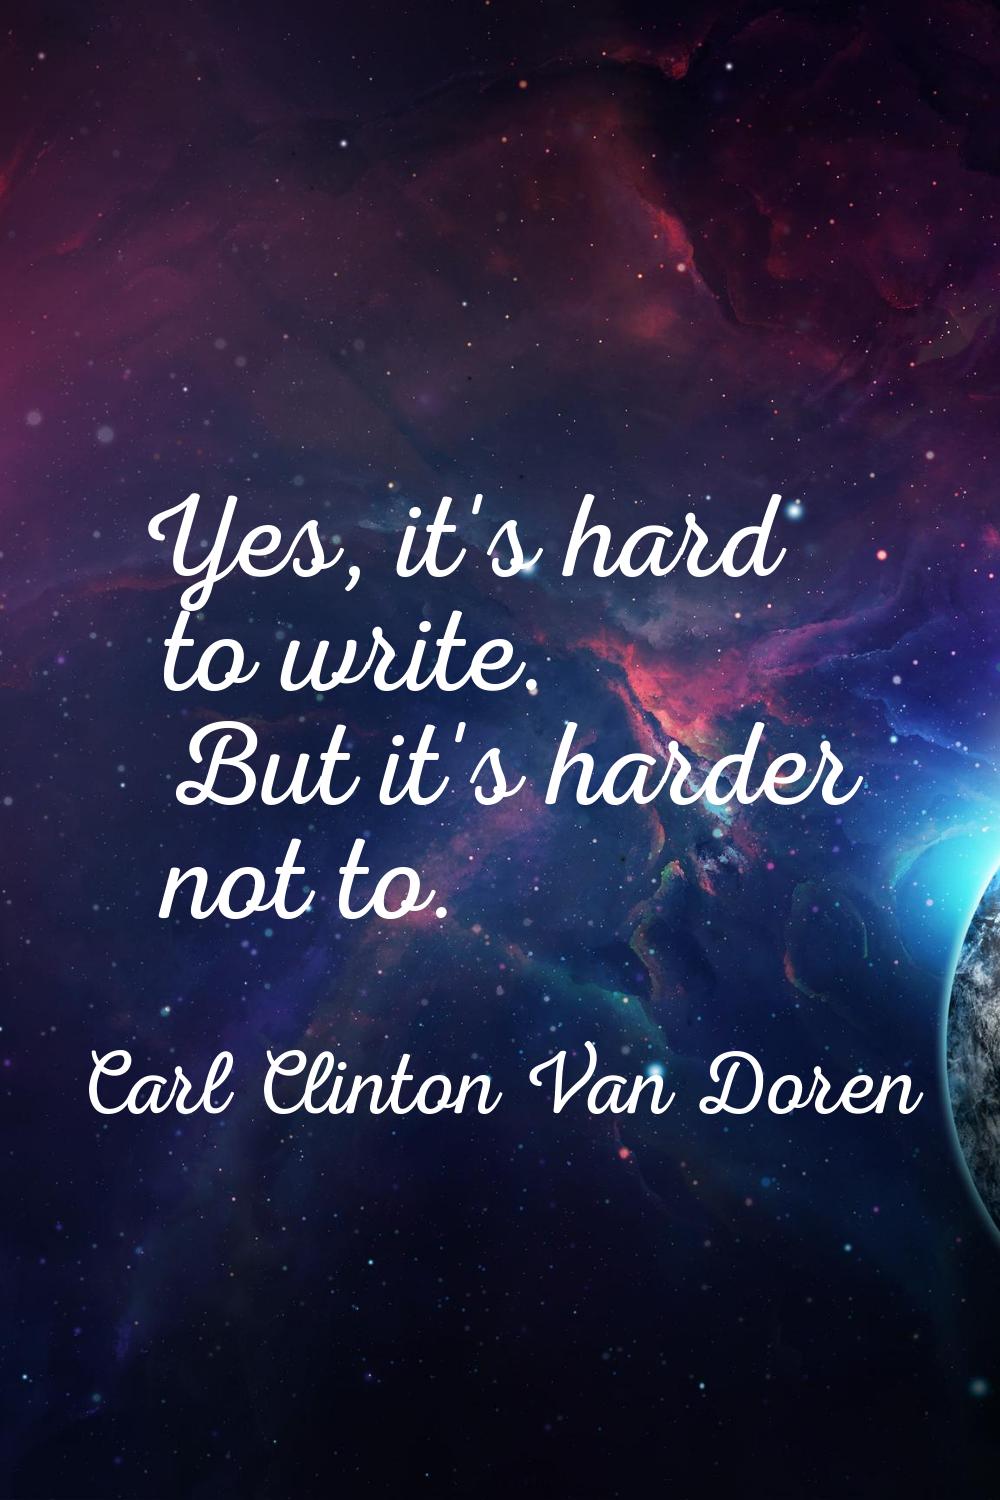 Yes, it's hard to write. But it's harder not to.